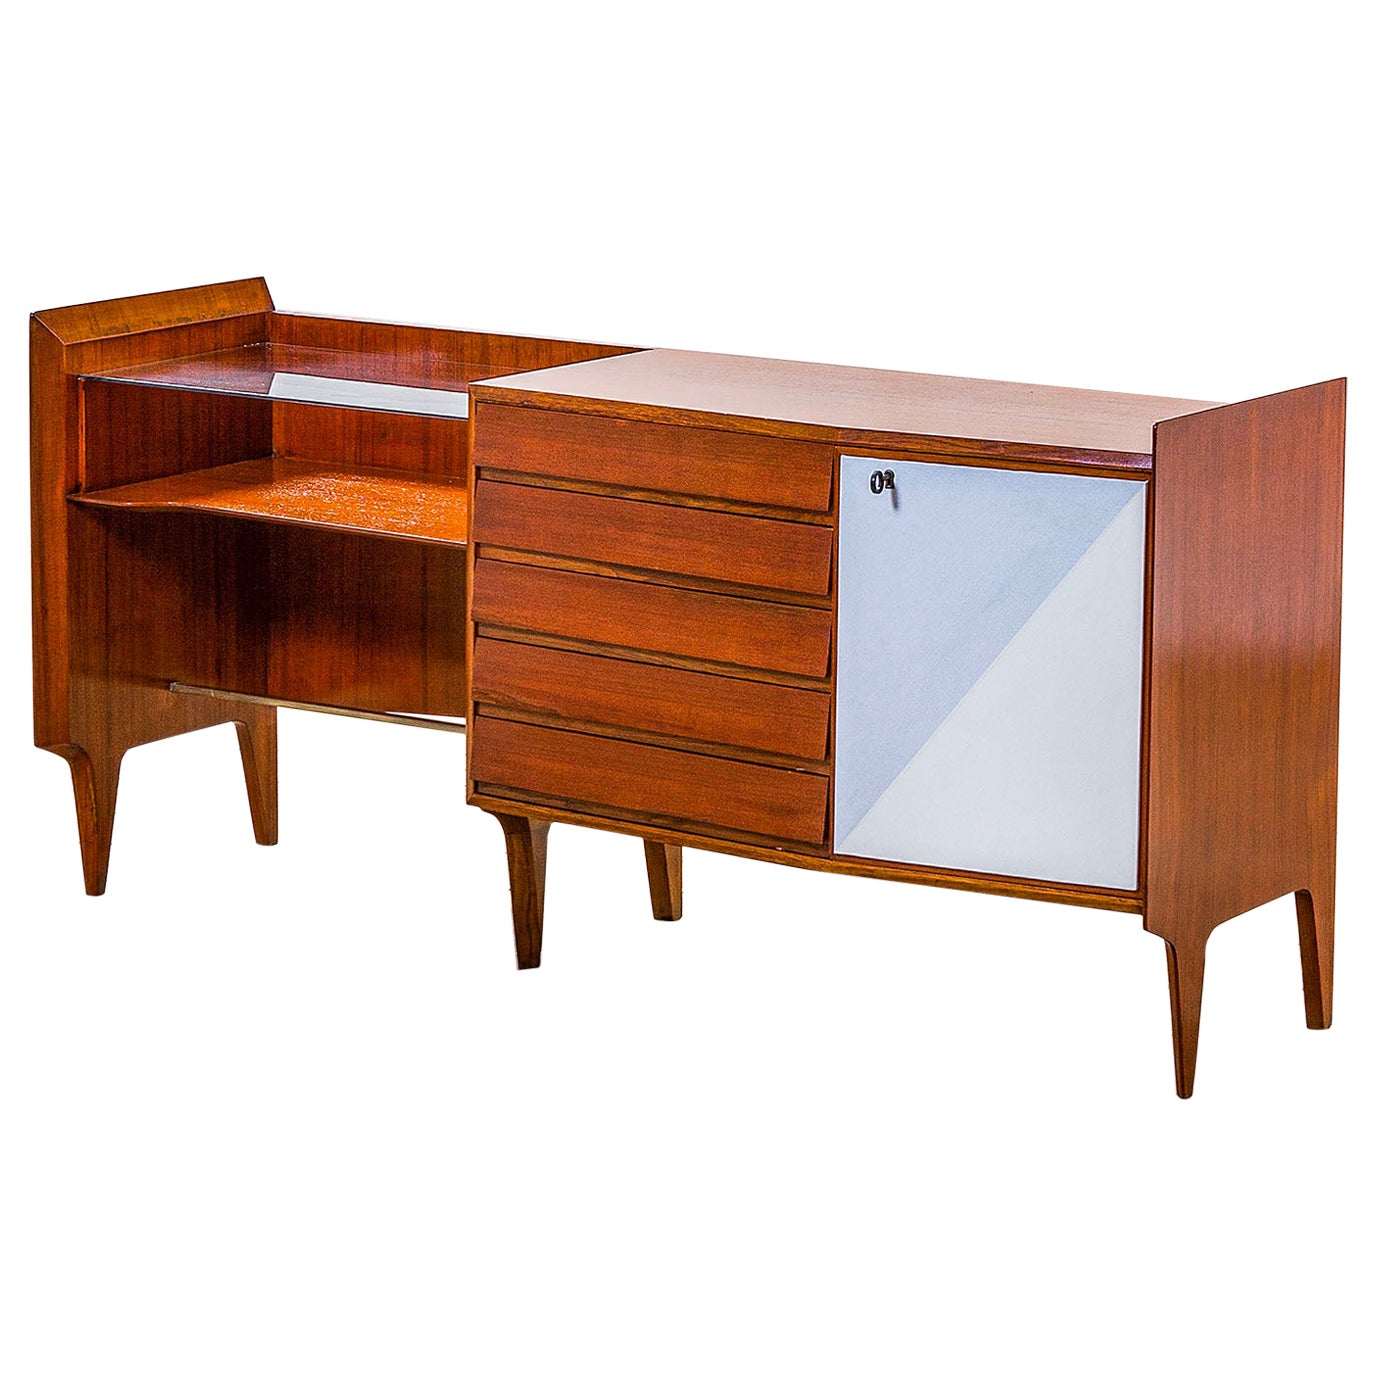 20th Century Gio Ponti Sideboard in Wood with Drawers and Storage for Dassi, 50s For Sale